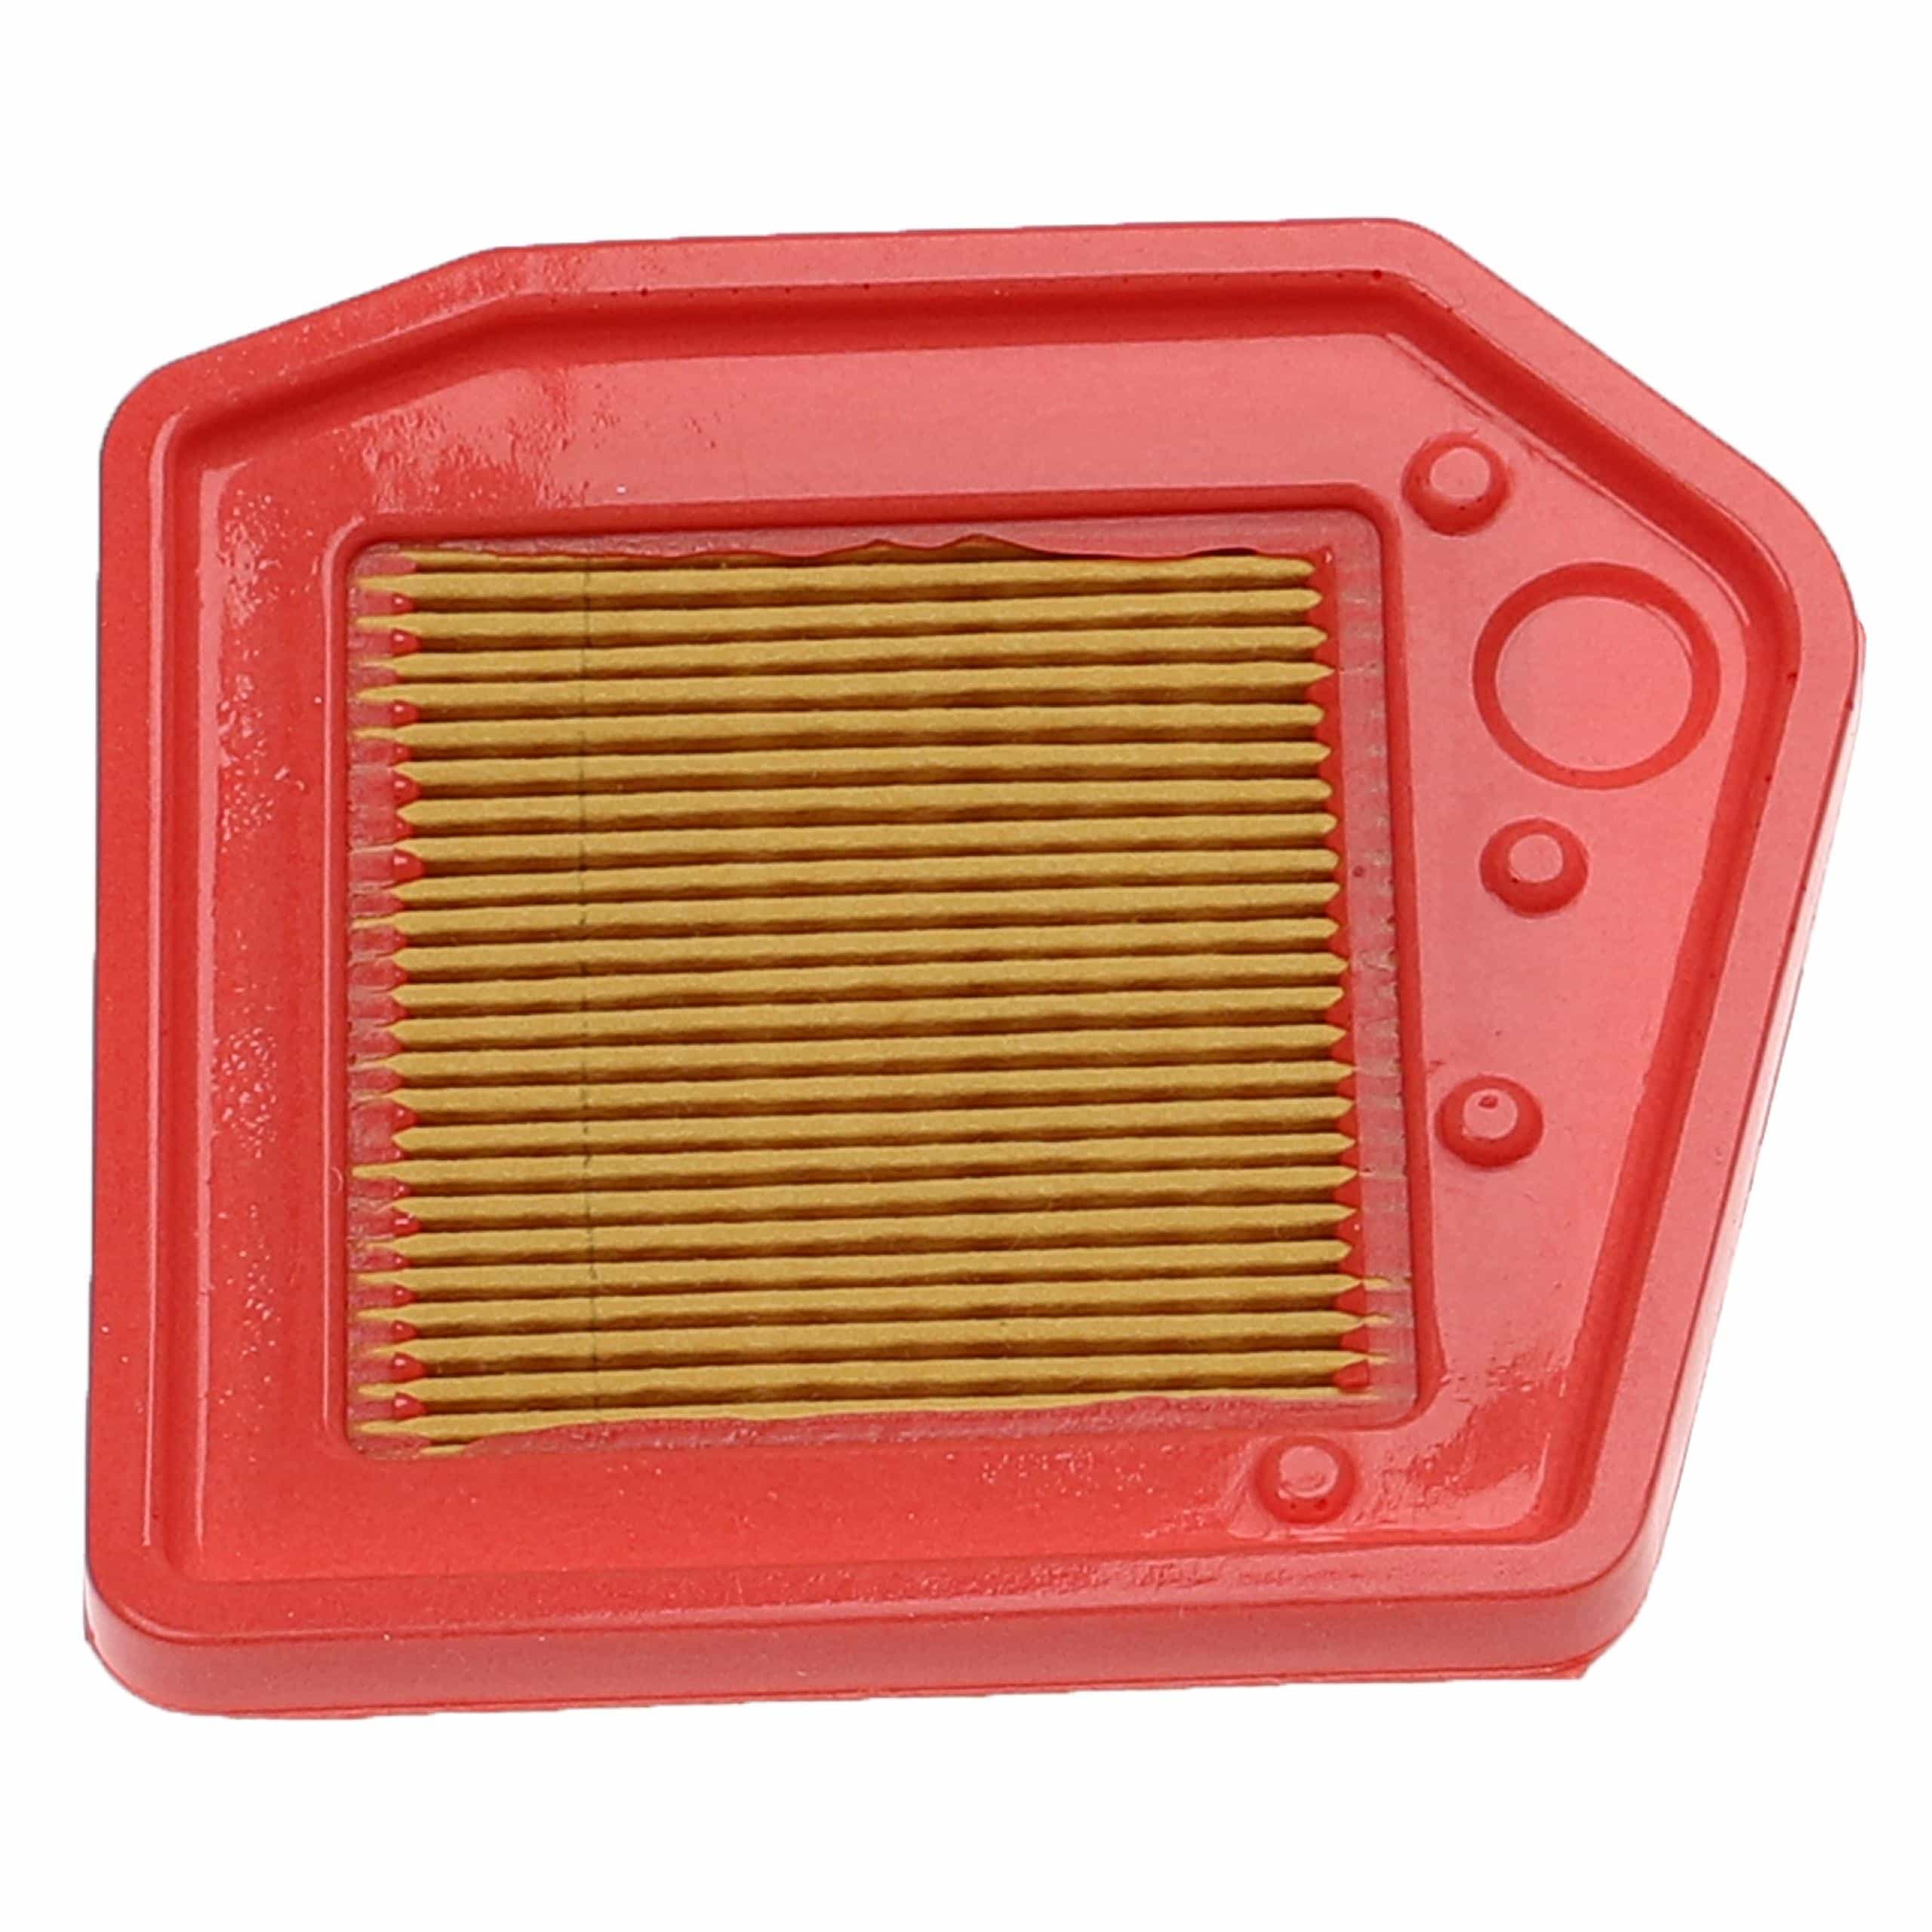 Filter replaces Stihl 41471410300, 4147 141 0300 for Power Saw - air filter